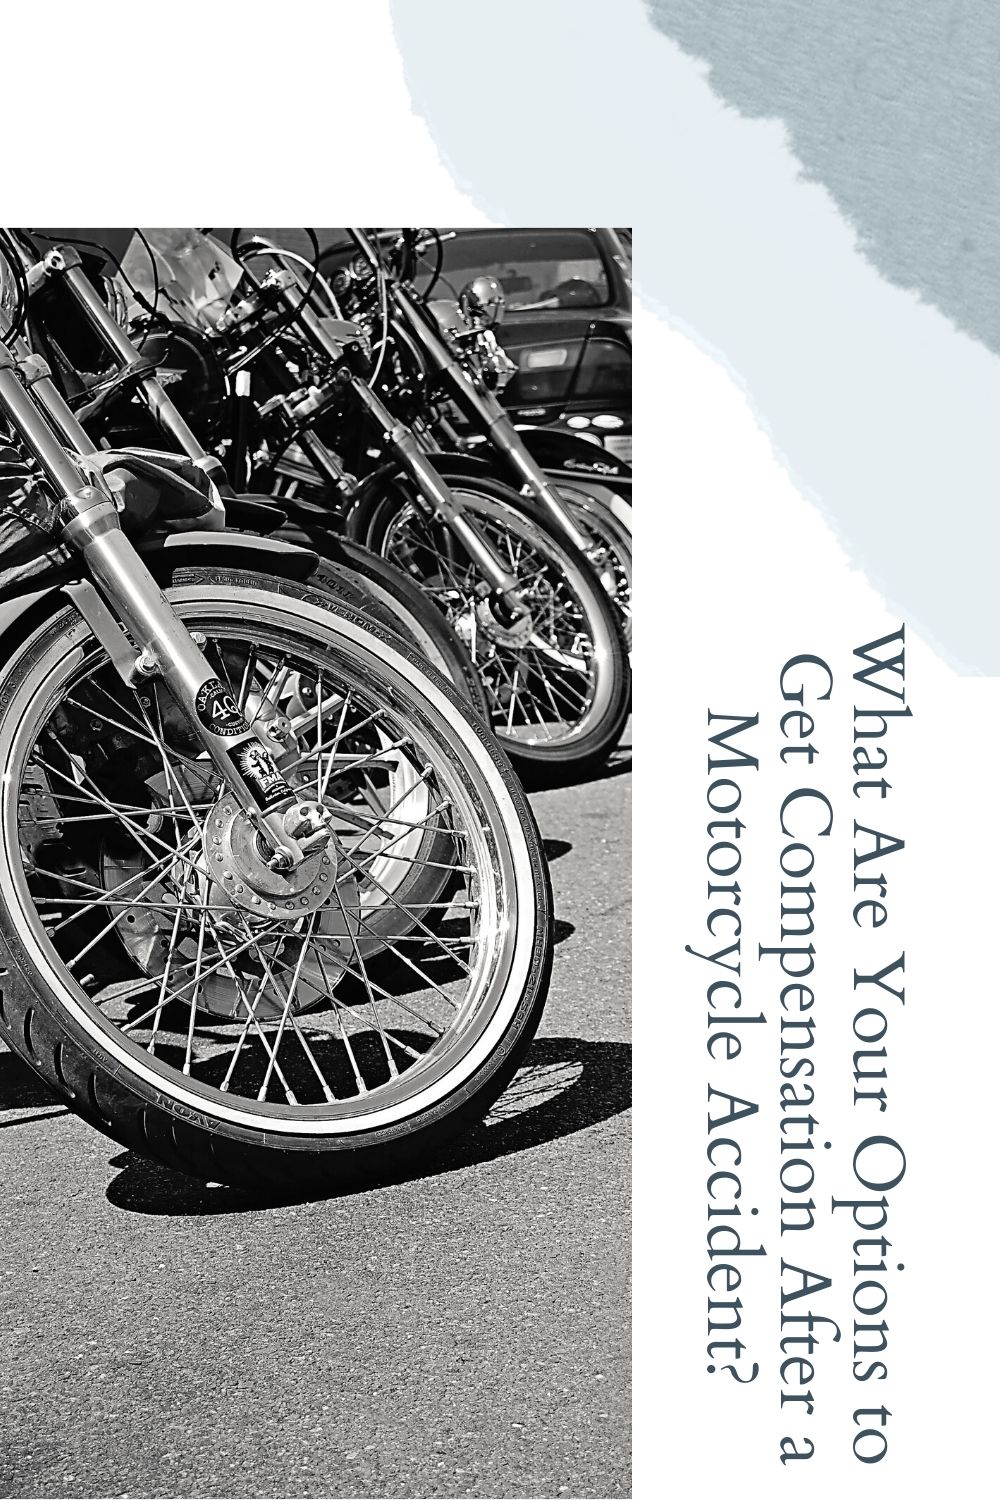 What Are Your Options to Get Compensation After a Motorcycle Accident